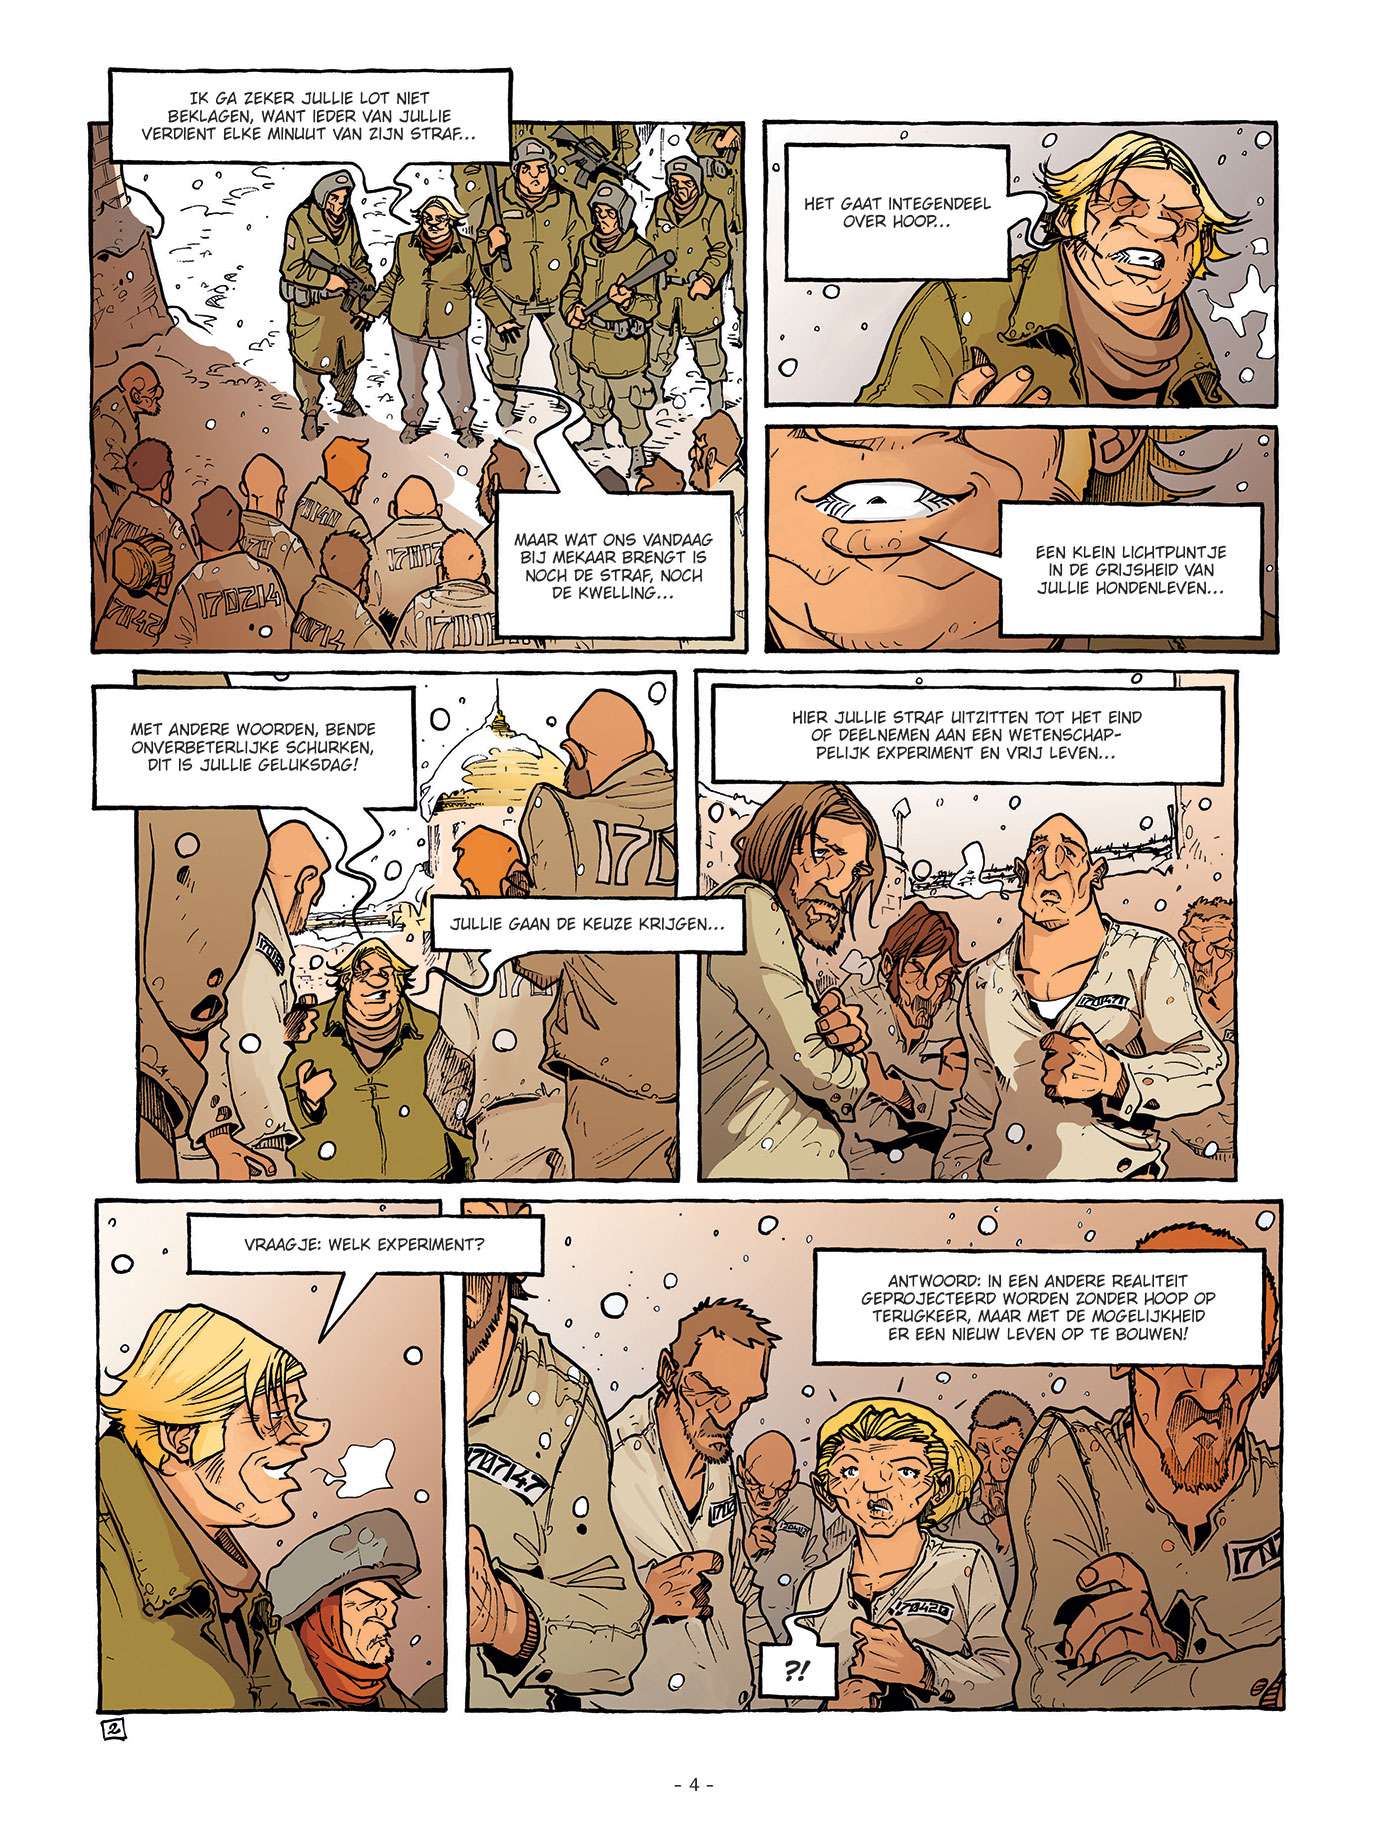 New Moscow 3 pagina 2